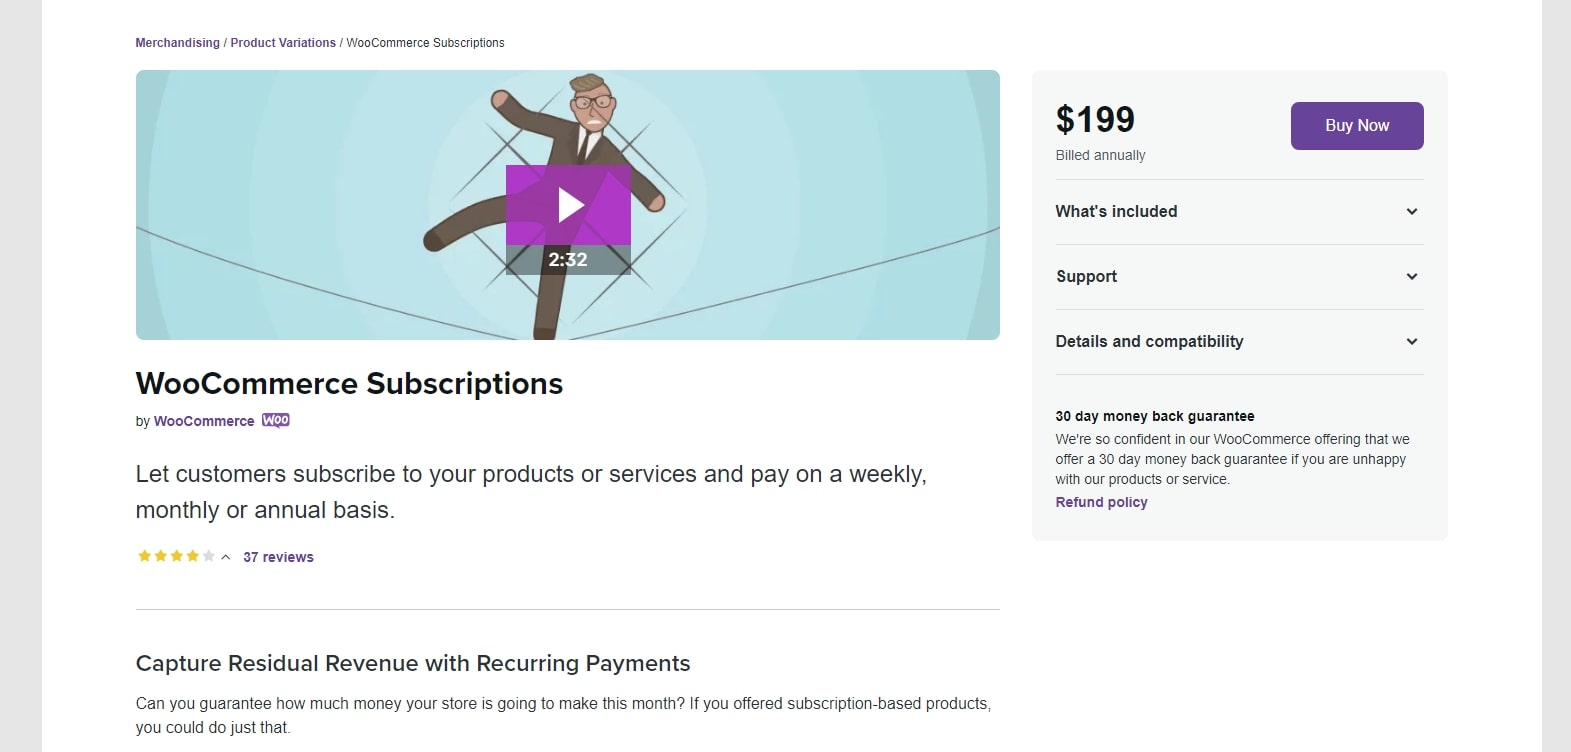 WooCommerce Subscriptions by WooCommerce